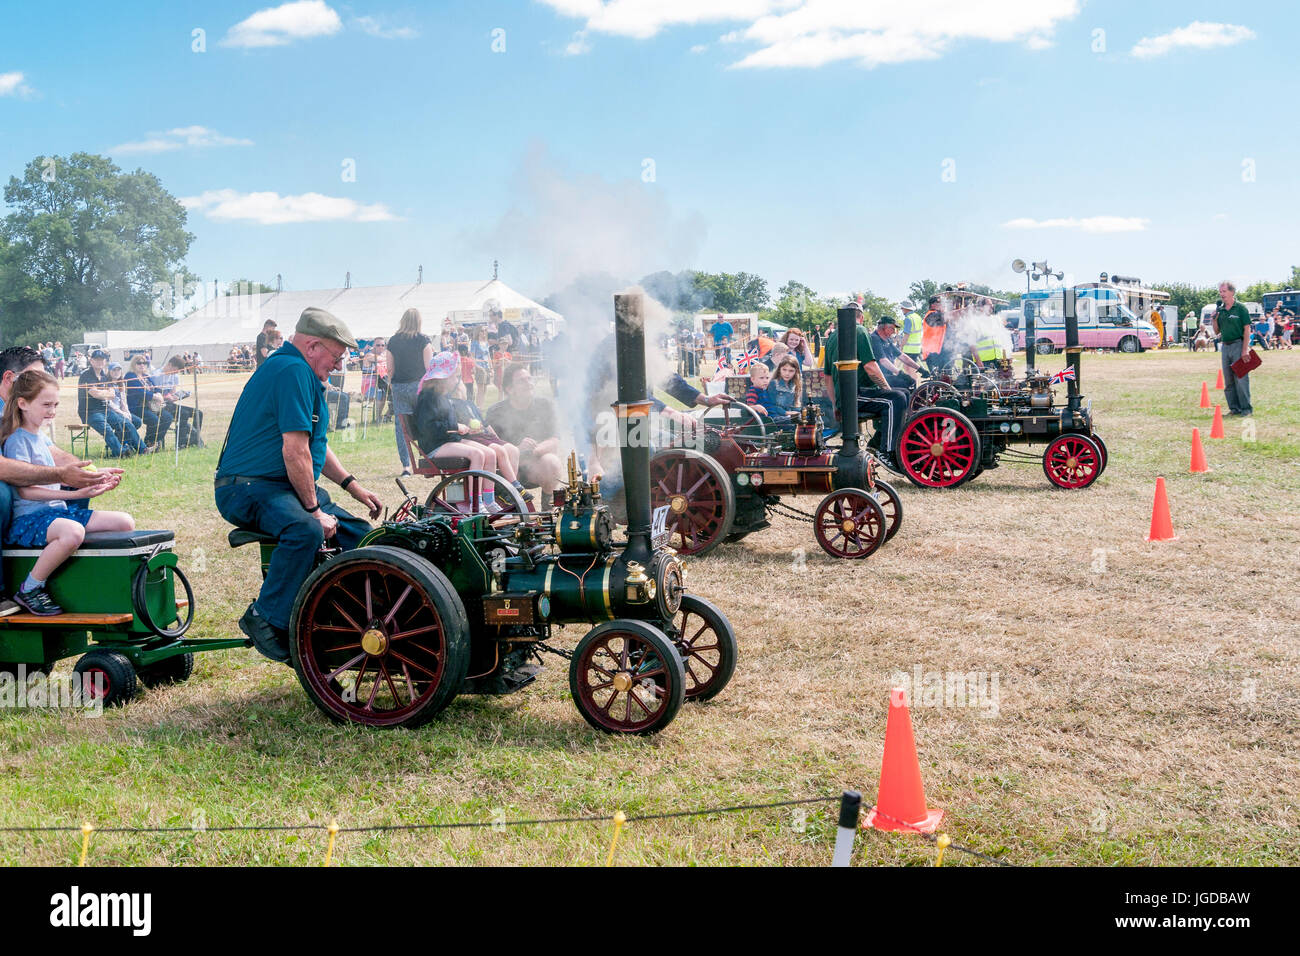 Children enjoying a race of miniature scale model traction engines at a steam rally Stock Photo